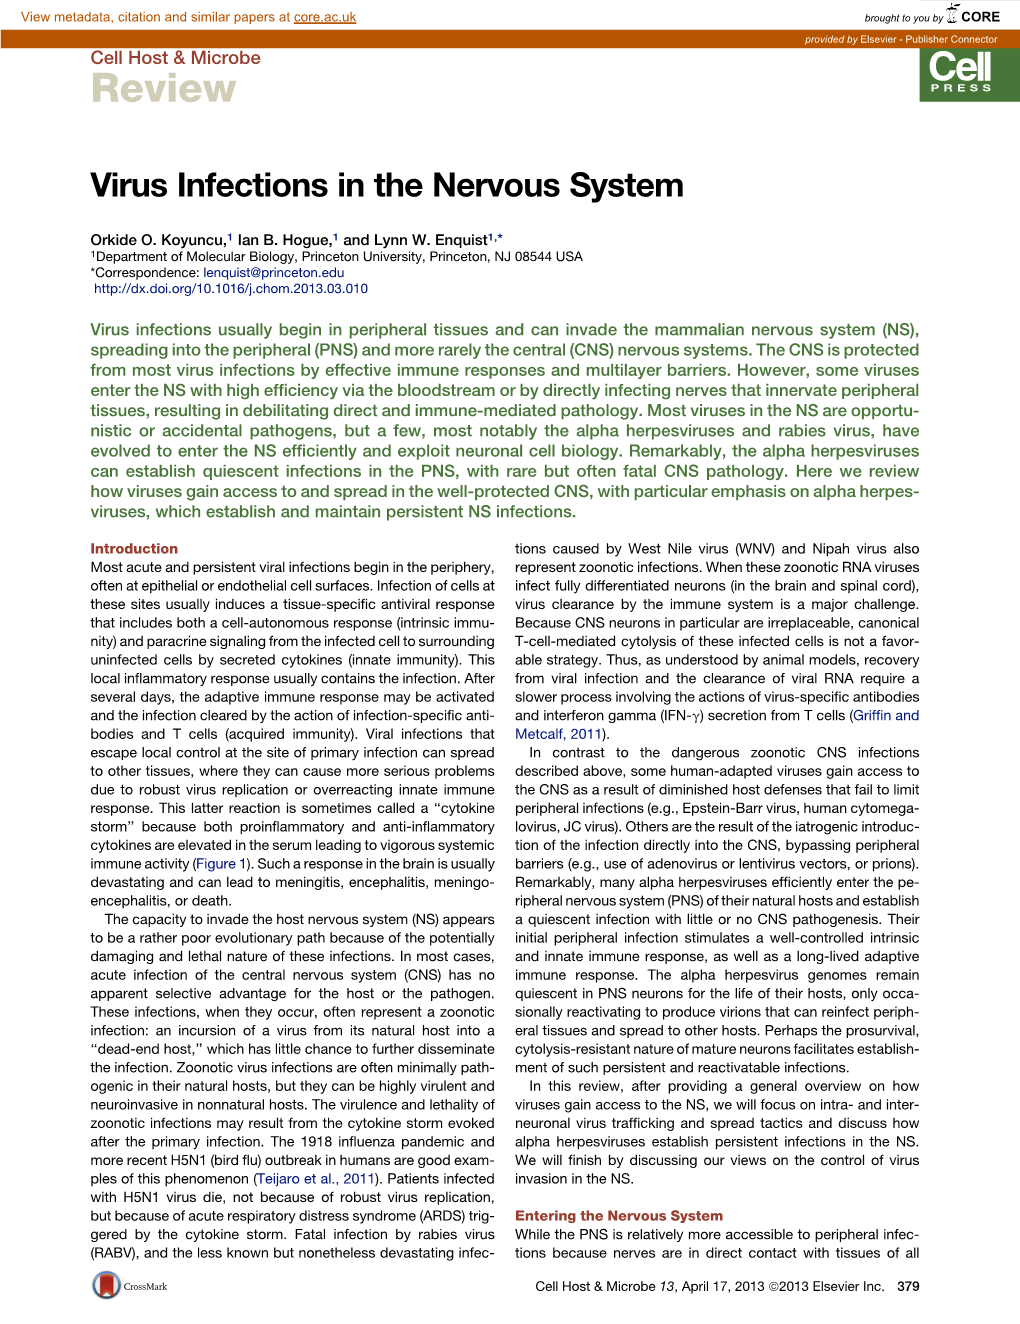 Virus Infections in the Nervous System